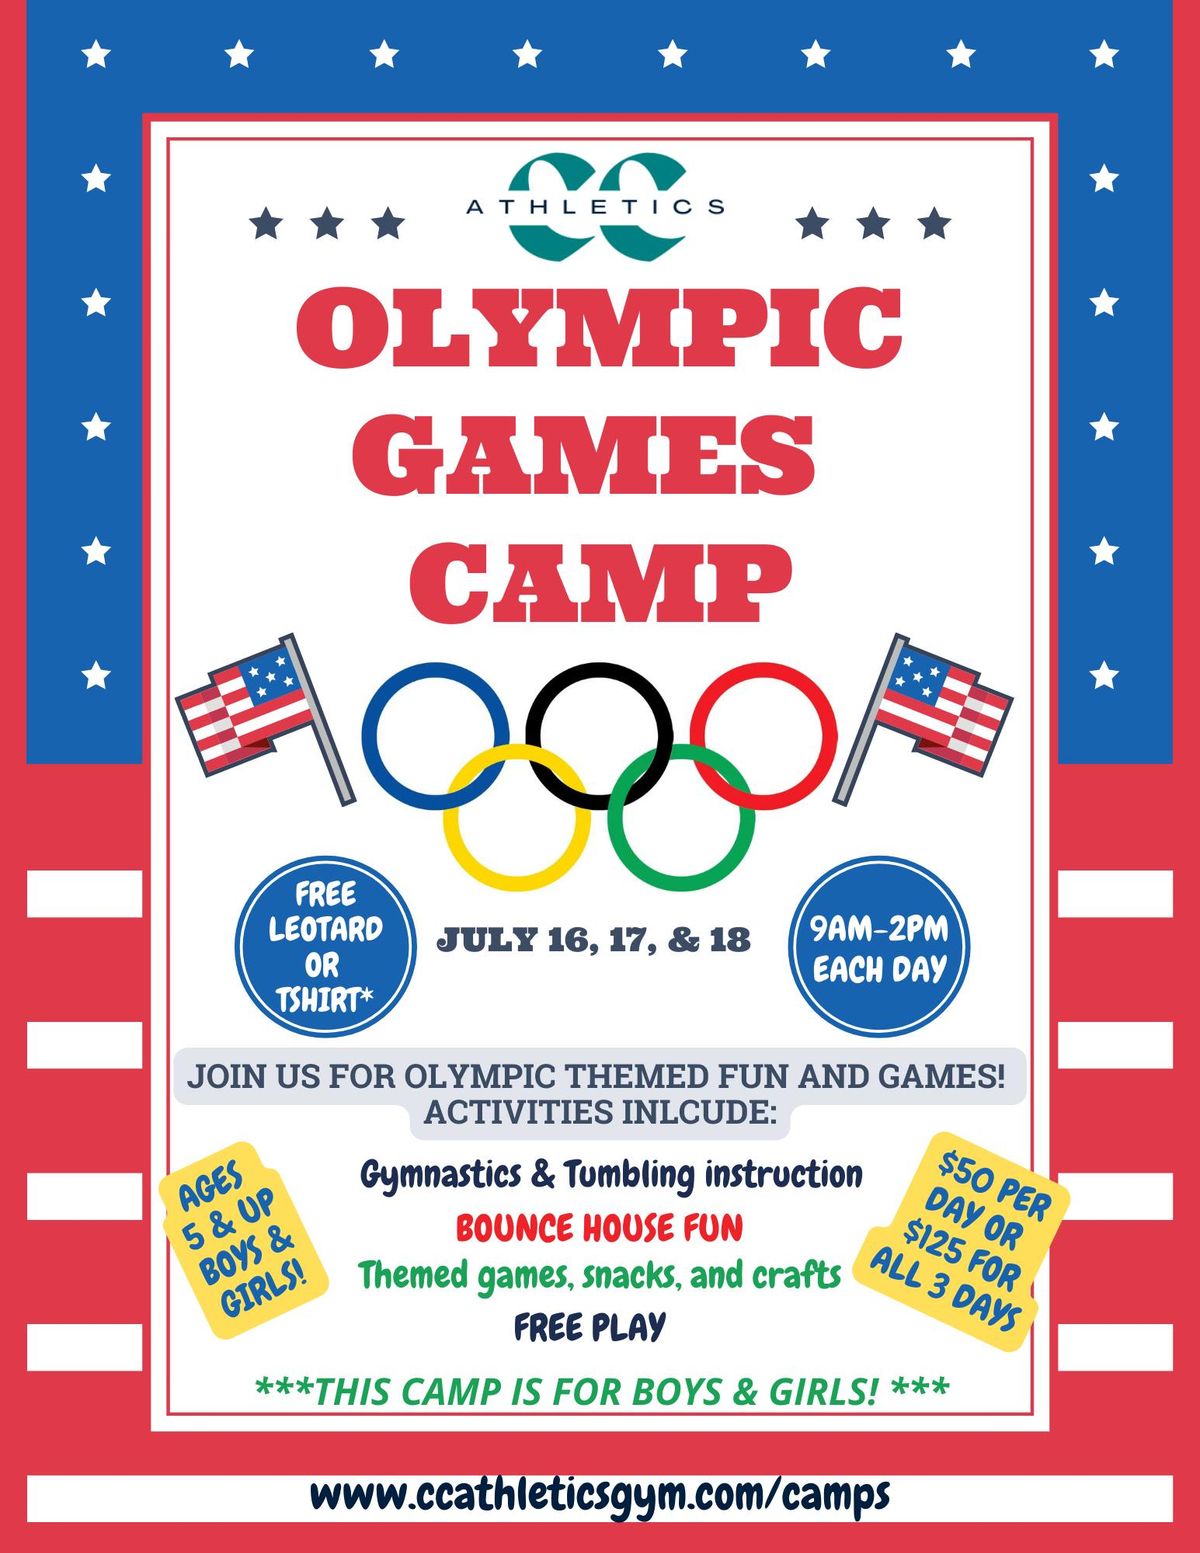 OLYMPIC GAMES CAMP